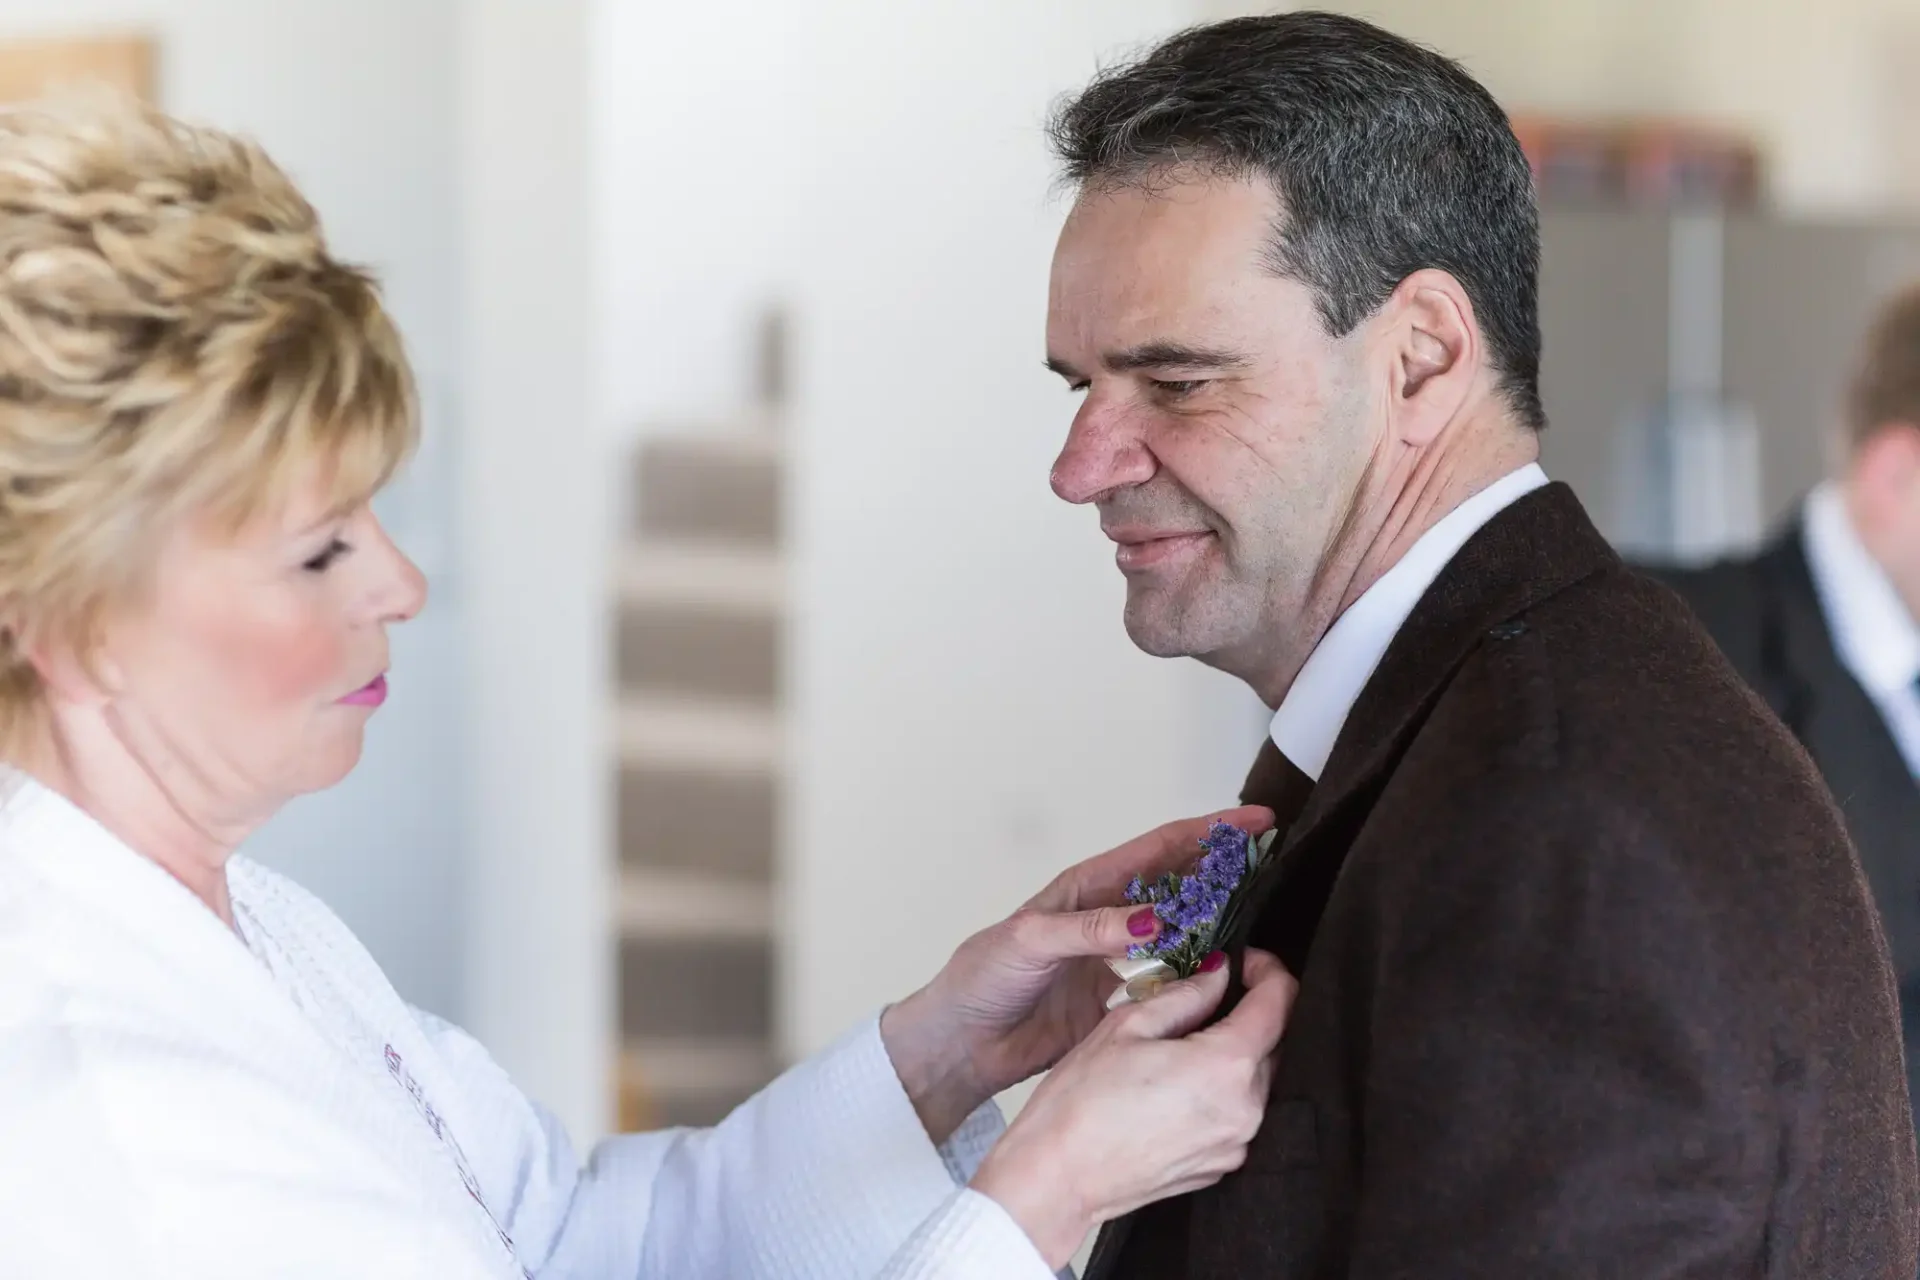 A woman adjusts a boutonniere on a smiling man's lapel in an indoor setting.